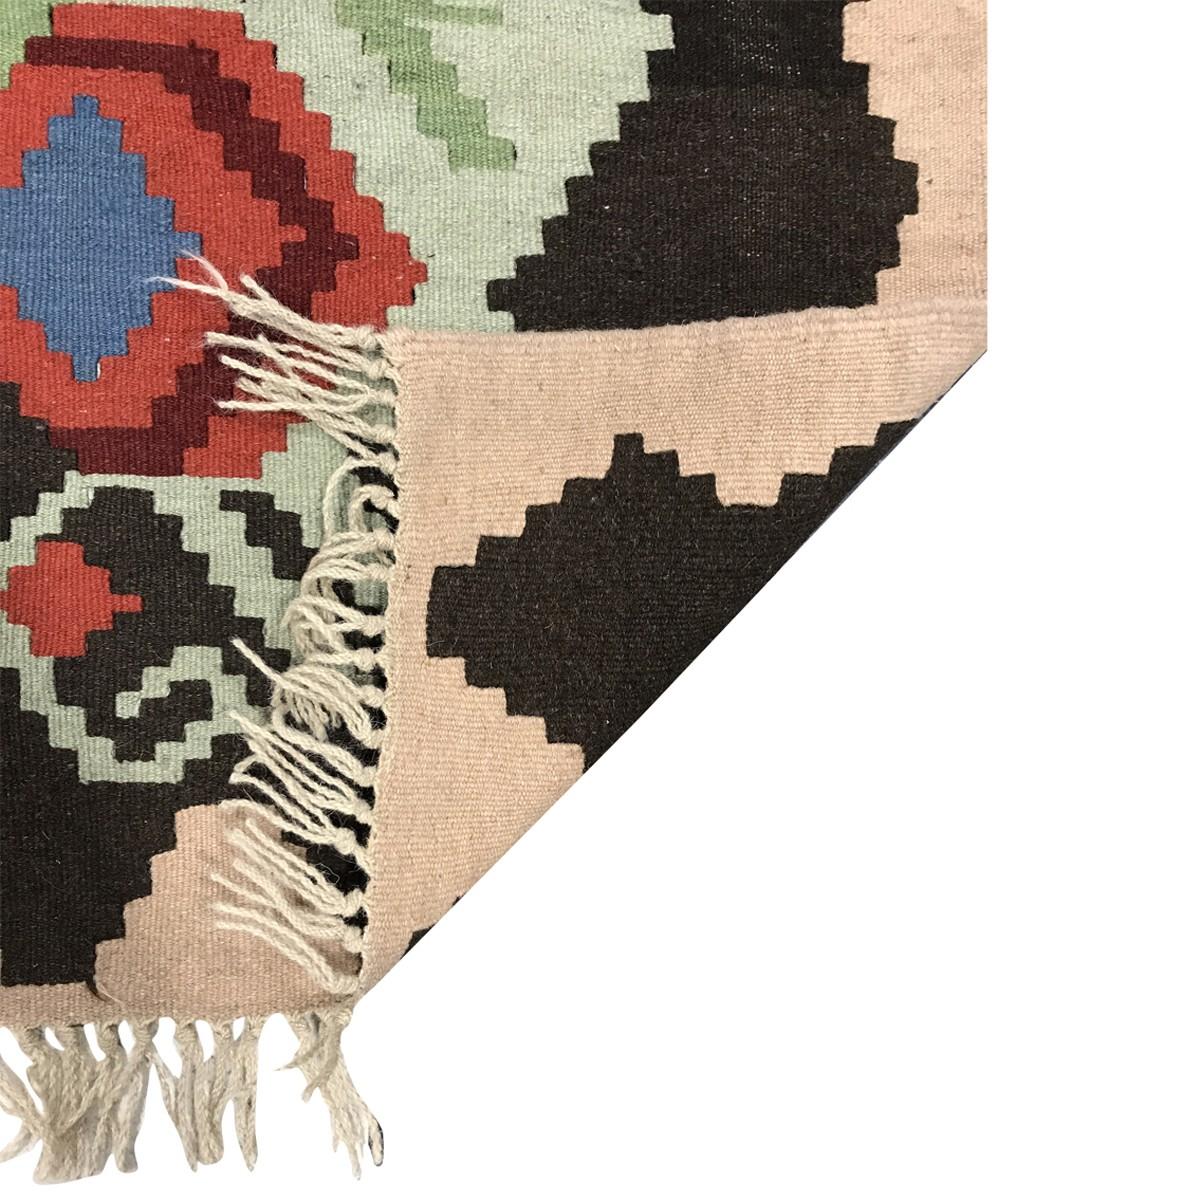 One-of-a kind vintage and antique Ghelims rugs, from Afghanistan, Turkey, Iran, Eastern and Central Asia. These historic rugs, woven between 1890 and 1950, have a contemporary flair for color, alongside their transitional and tribal patterns. Each